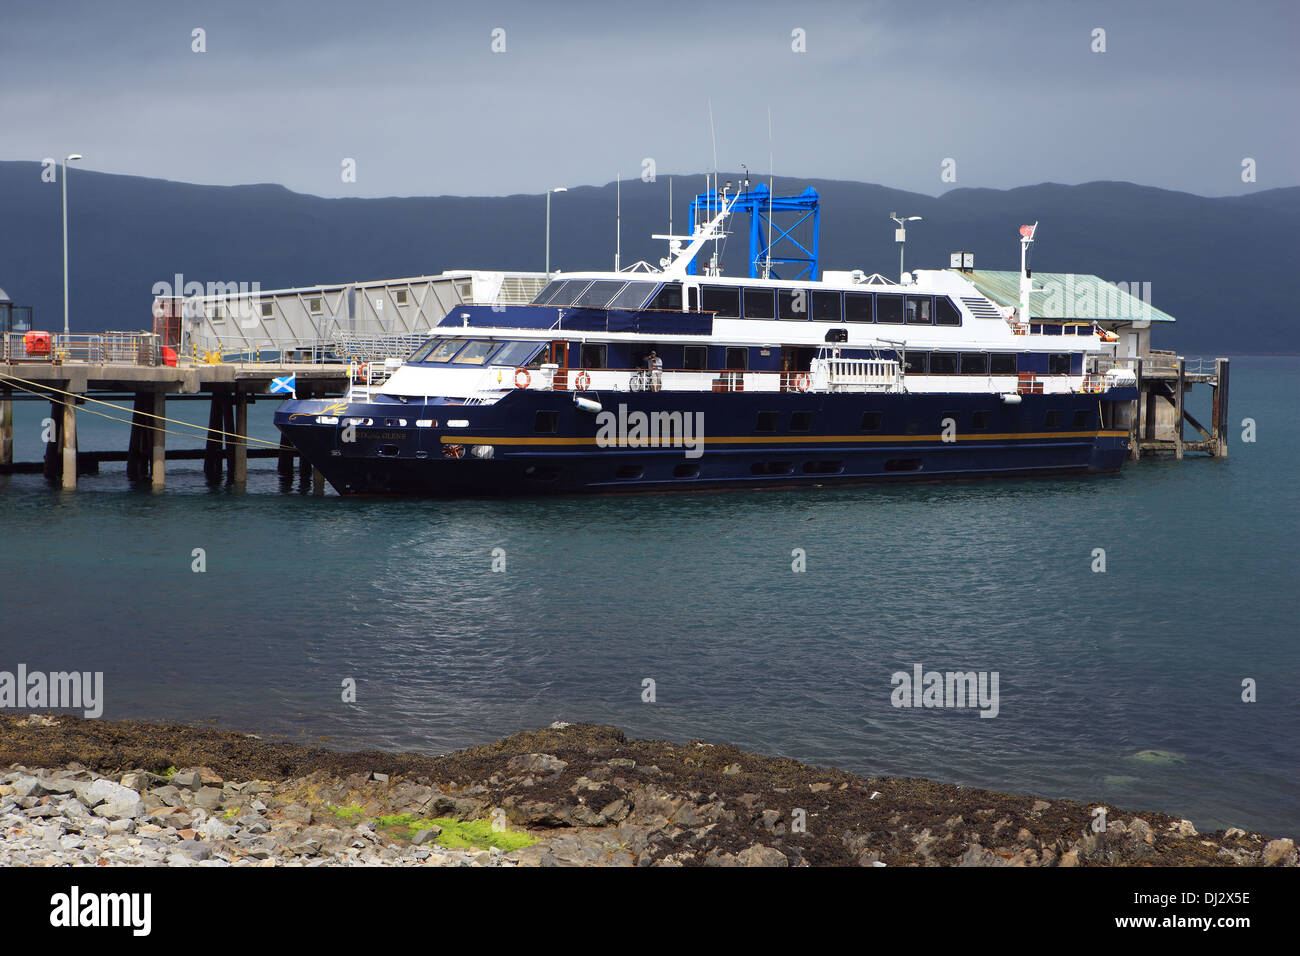 MV Lord of the Glens, small cruise vessel with boutique style cabins docked at Craignure in the Isle of Mull Stock Photo